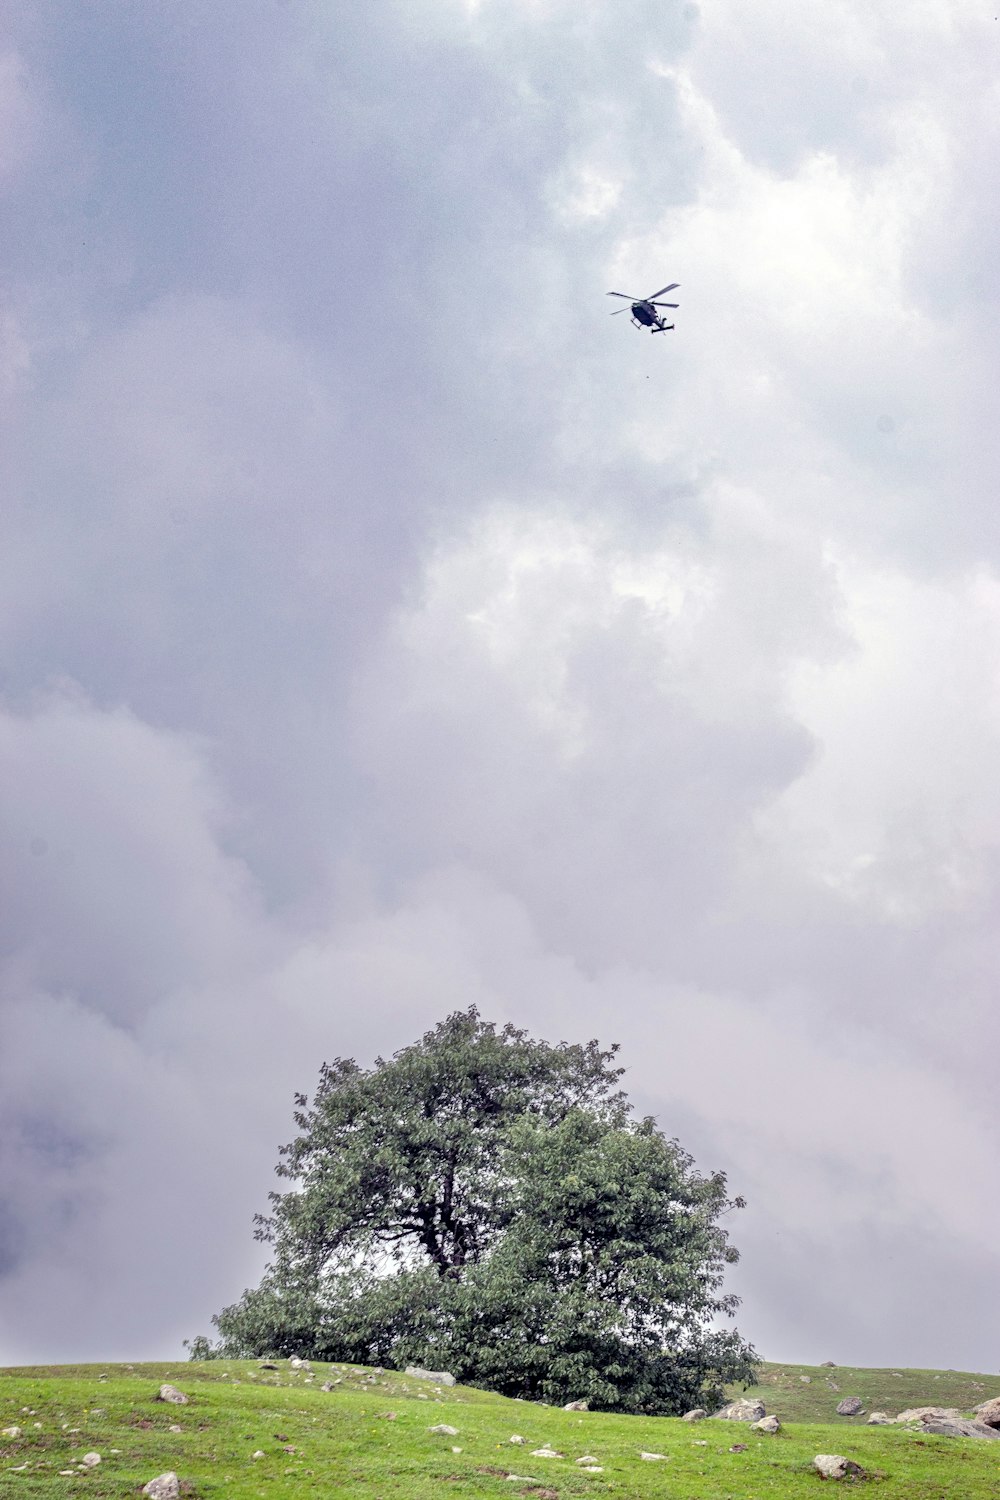 a plane flying over a tree on a cloudy day